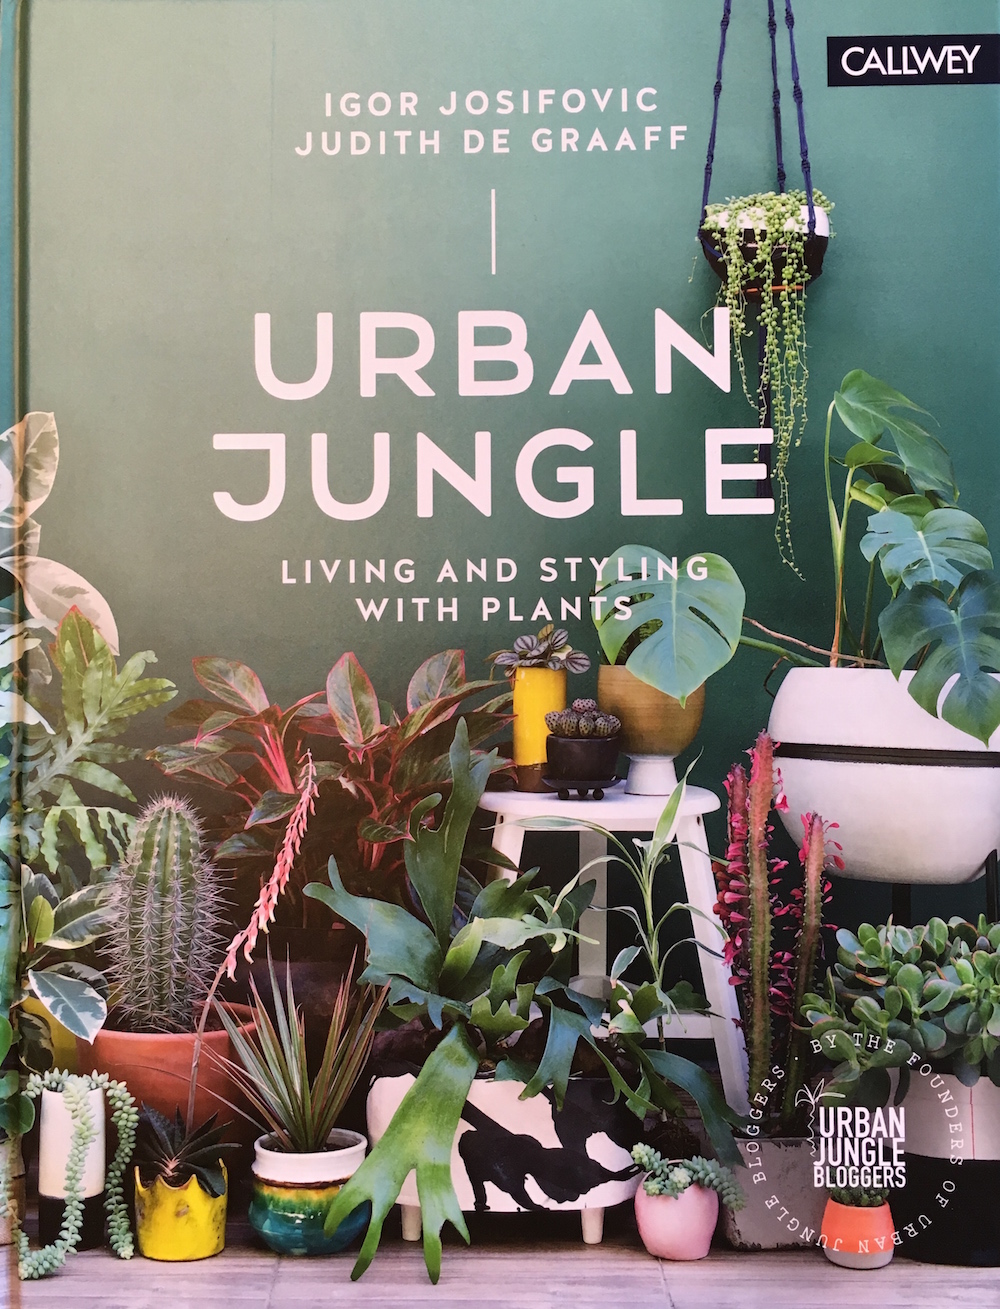 Boekreview van Urban Jungle - Living and styling with plants